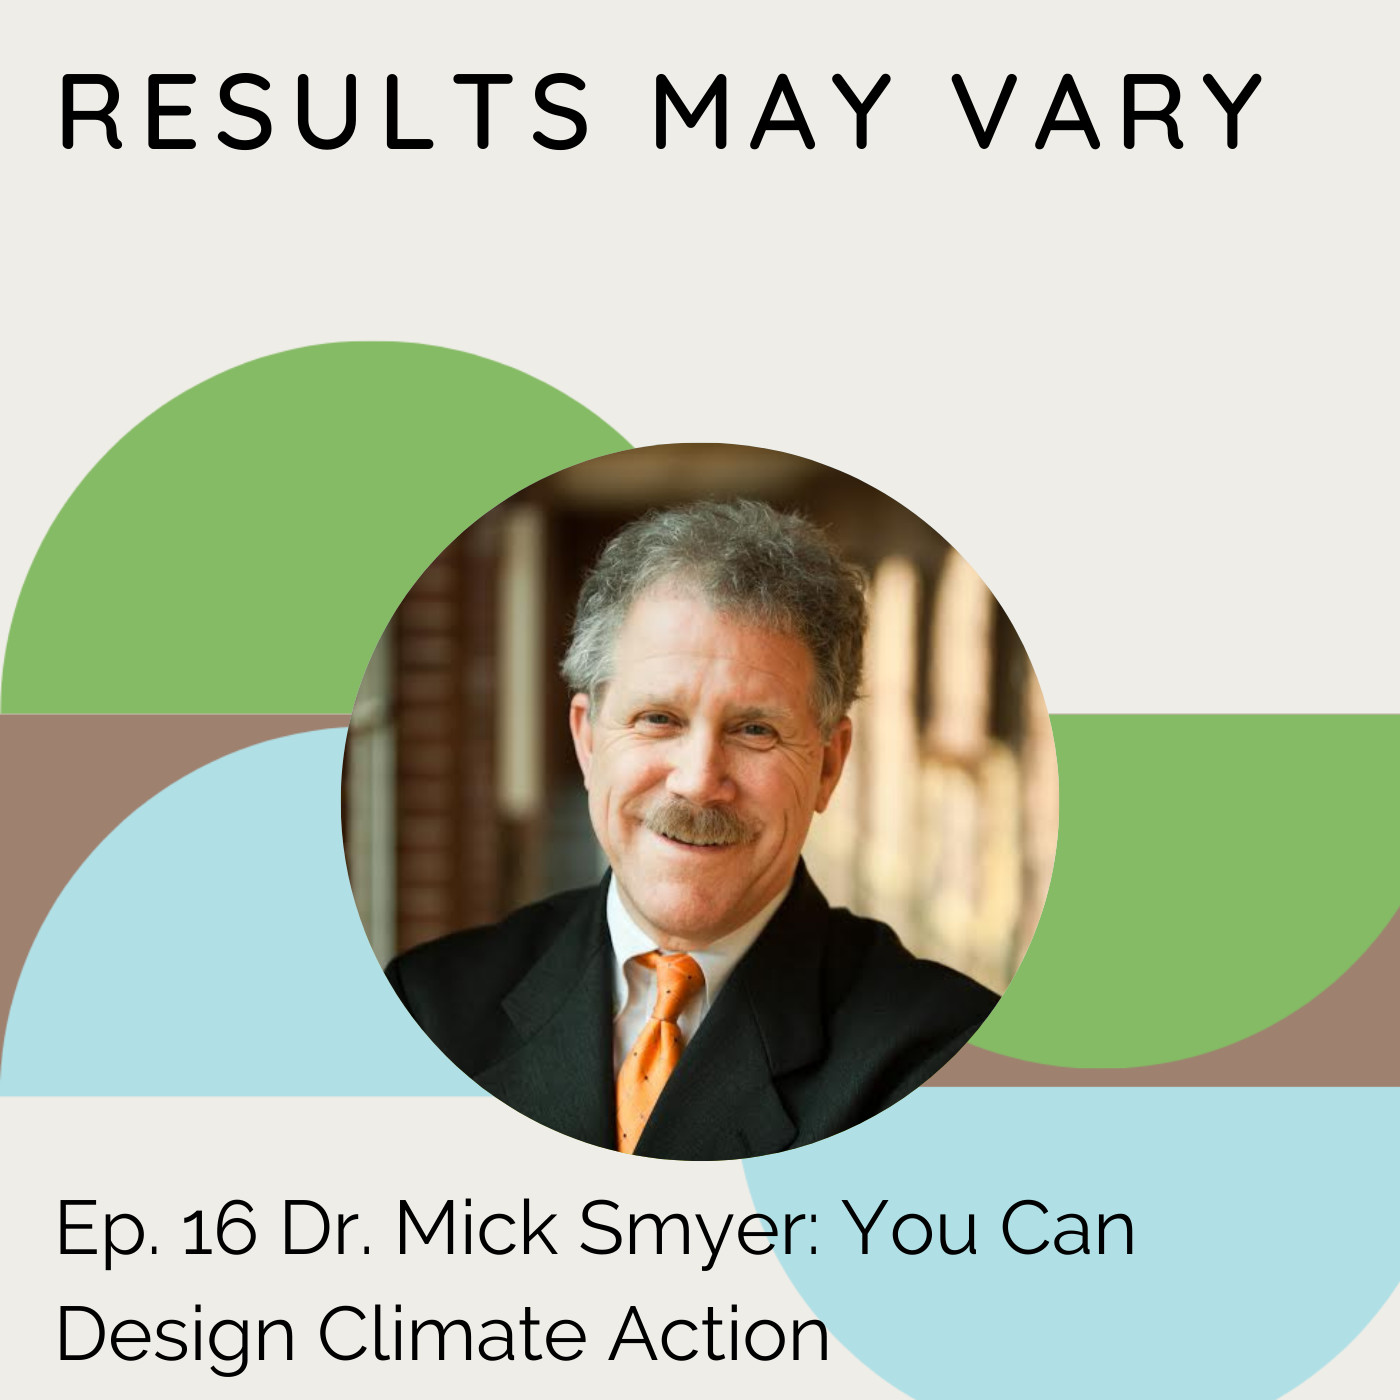 RMV 16 Dr. Mick Smyer: You Can Design Climate Action